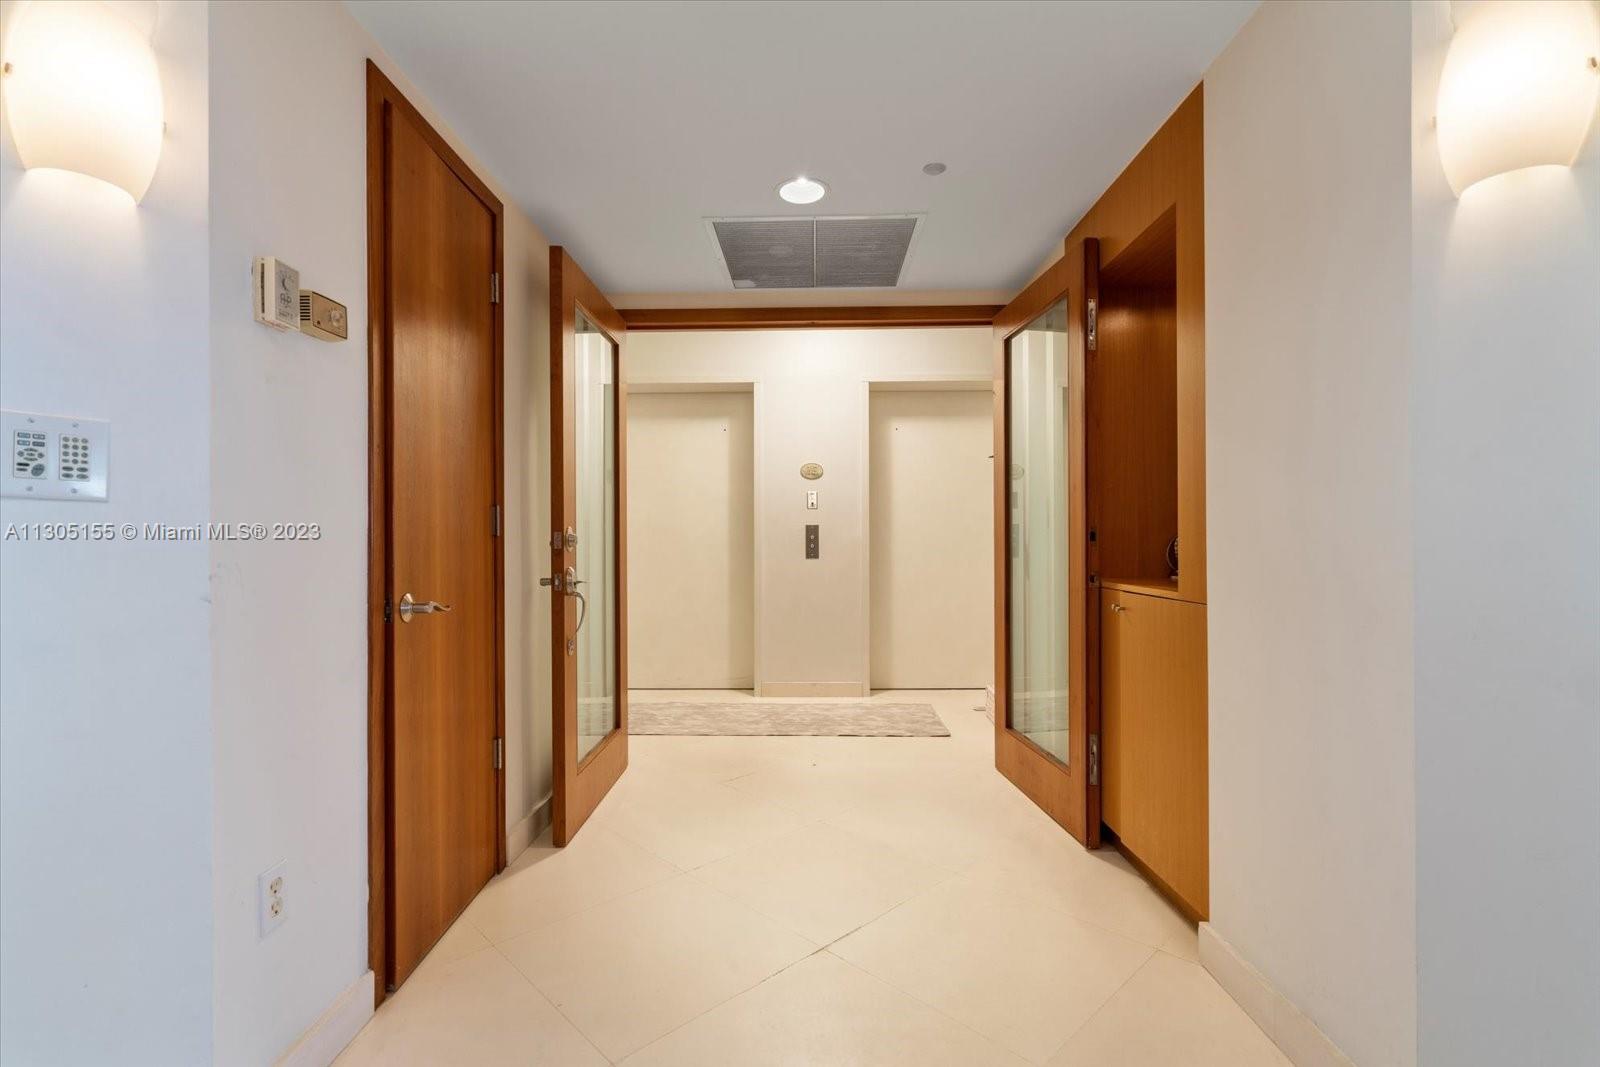 Private elevator foyer into your unit